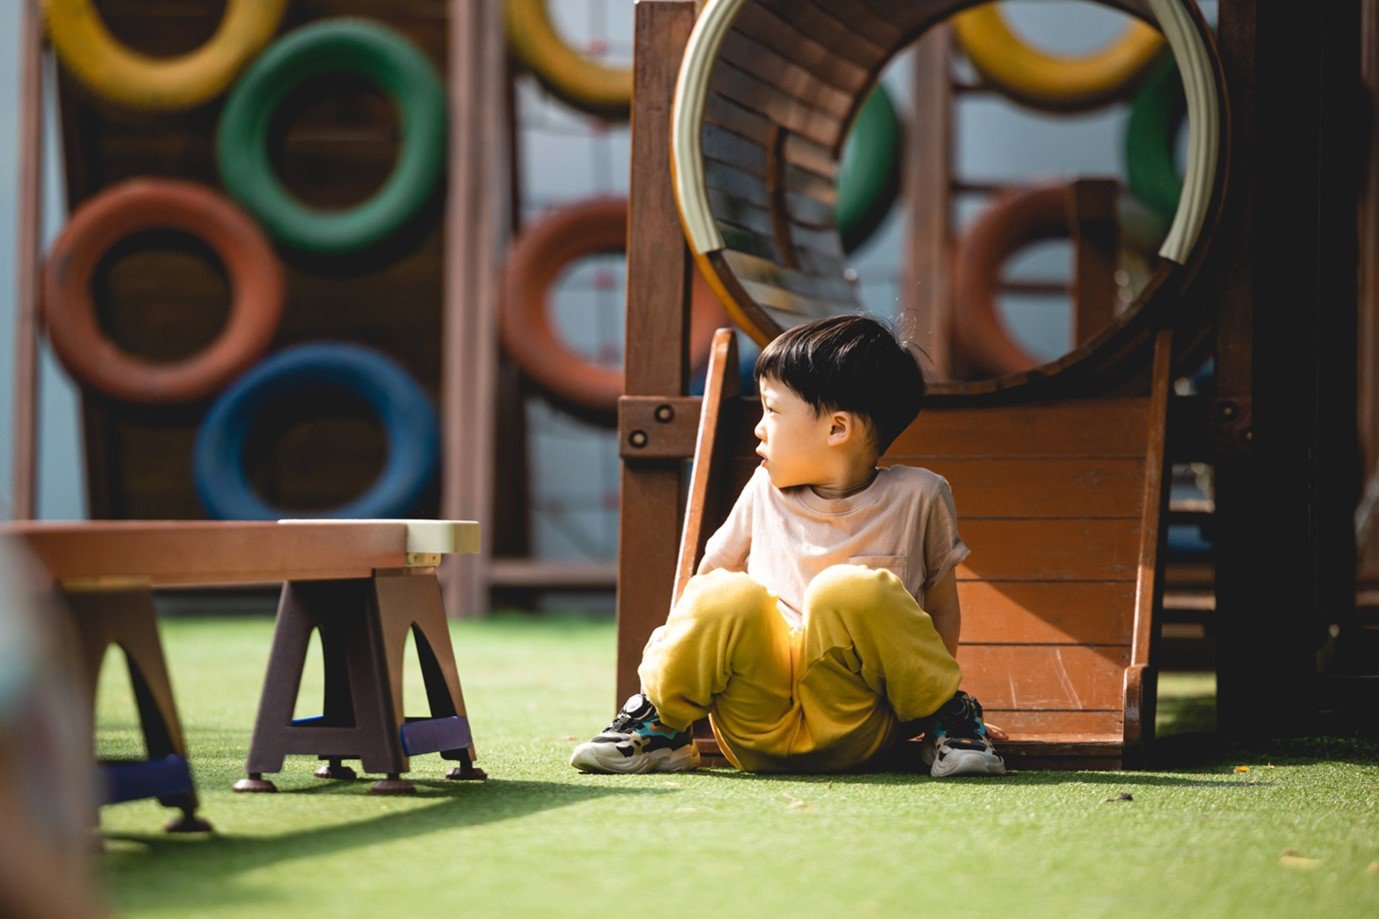 A child sitting on the floor in a playground